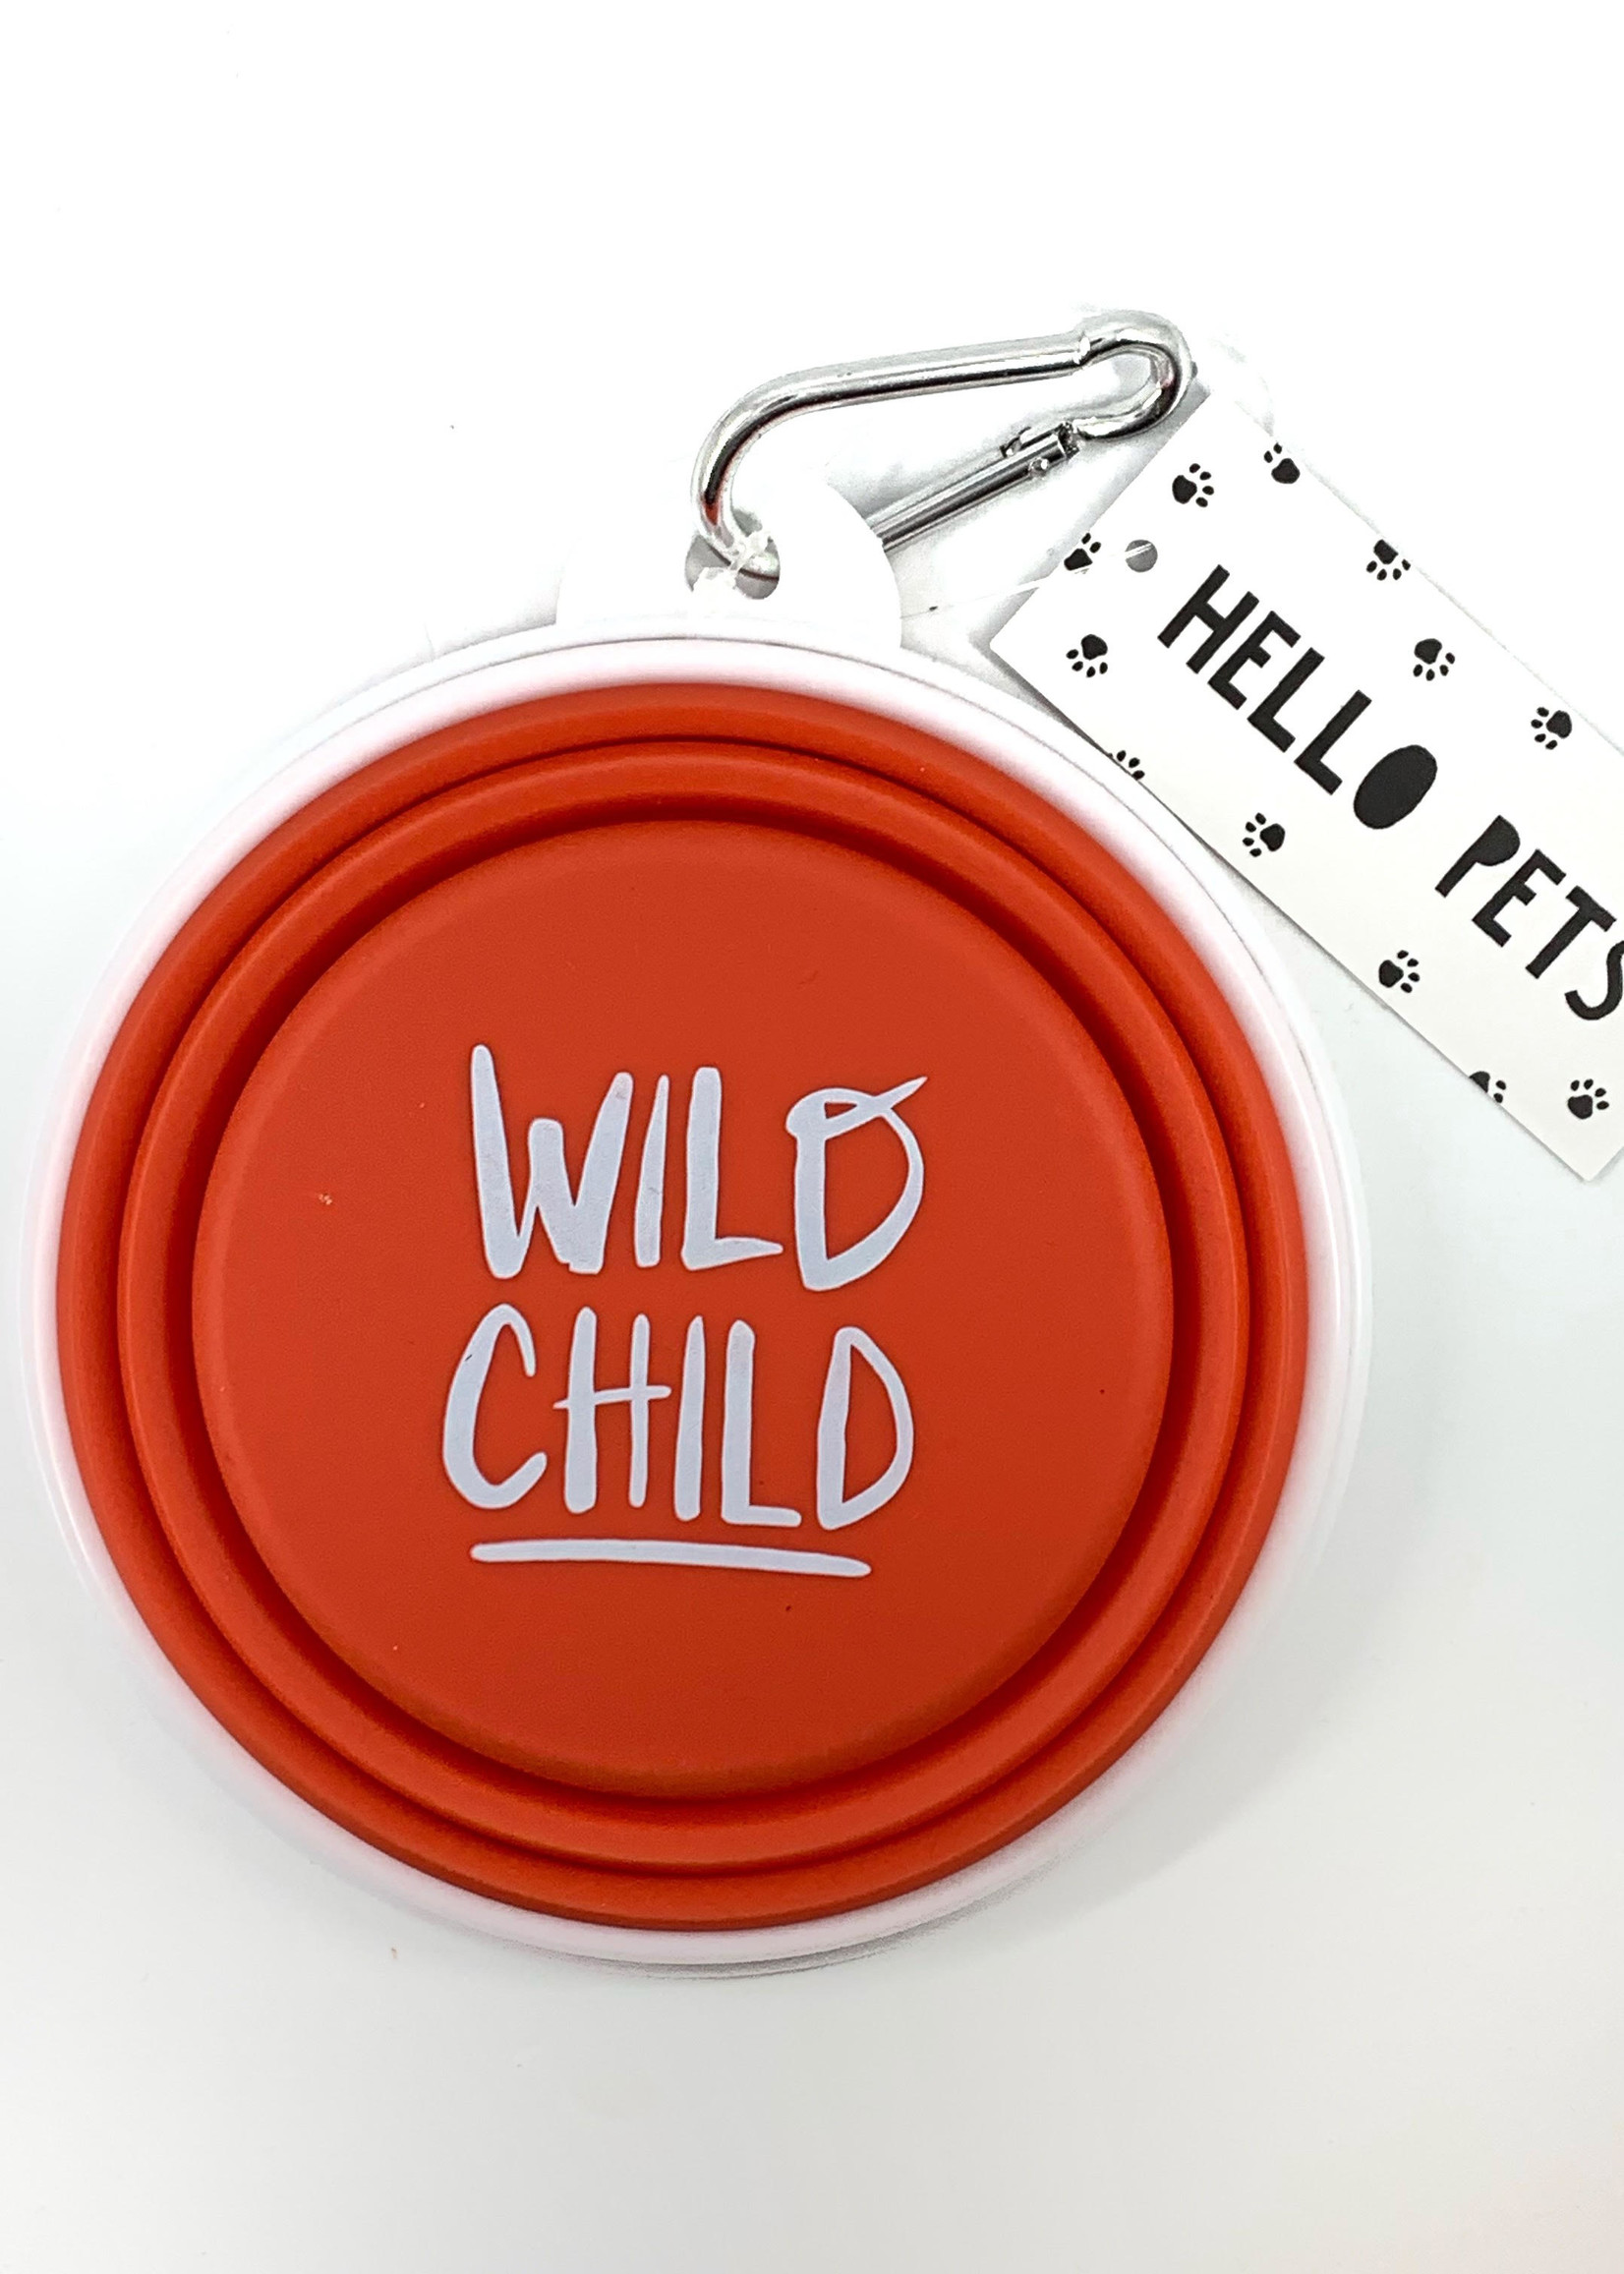 About Face Designs Wild Child Dog Bowl